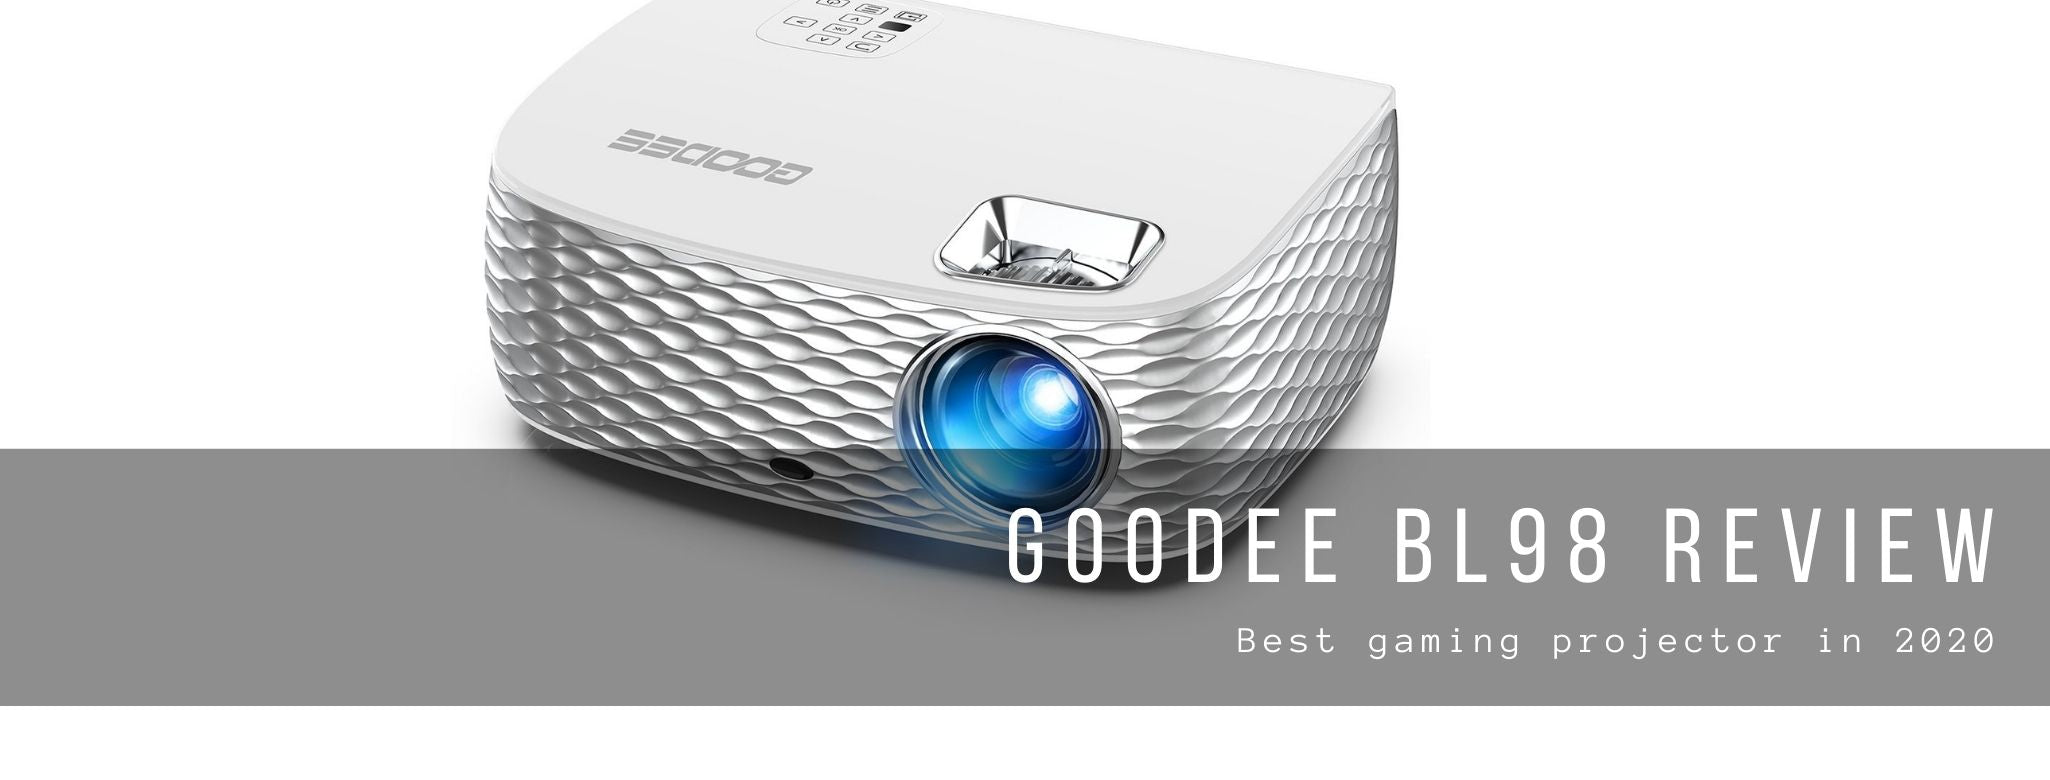 Goodee BL98 Review – Best gaming projector in 2020